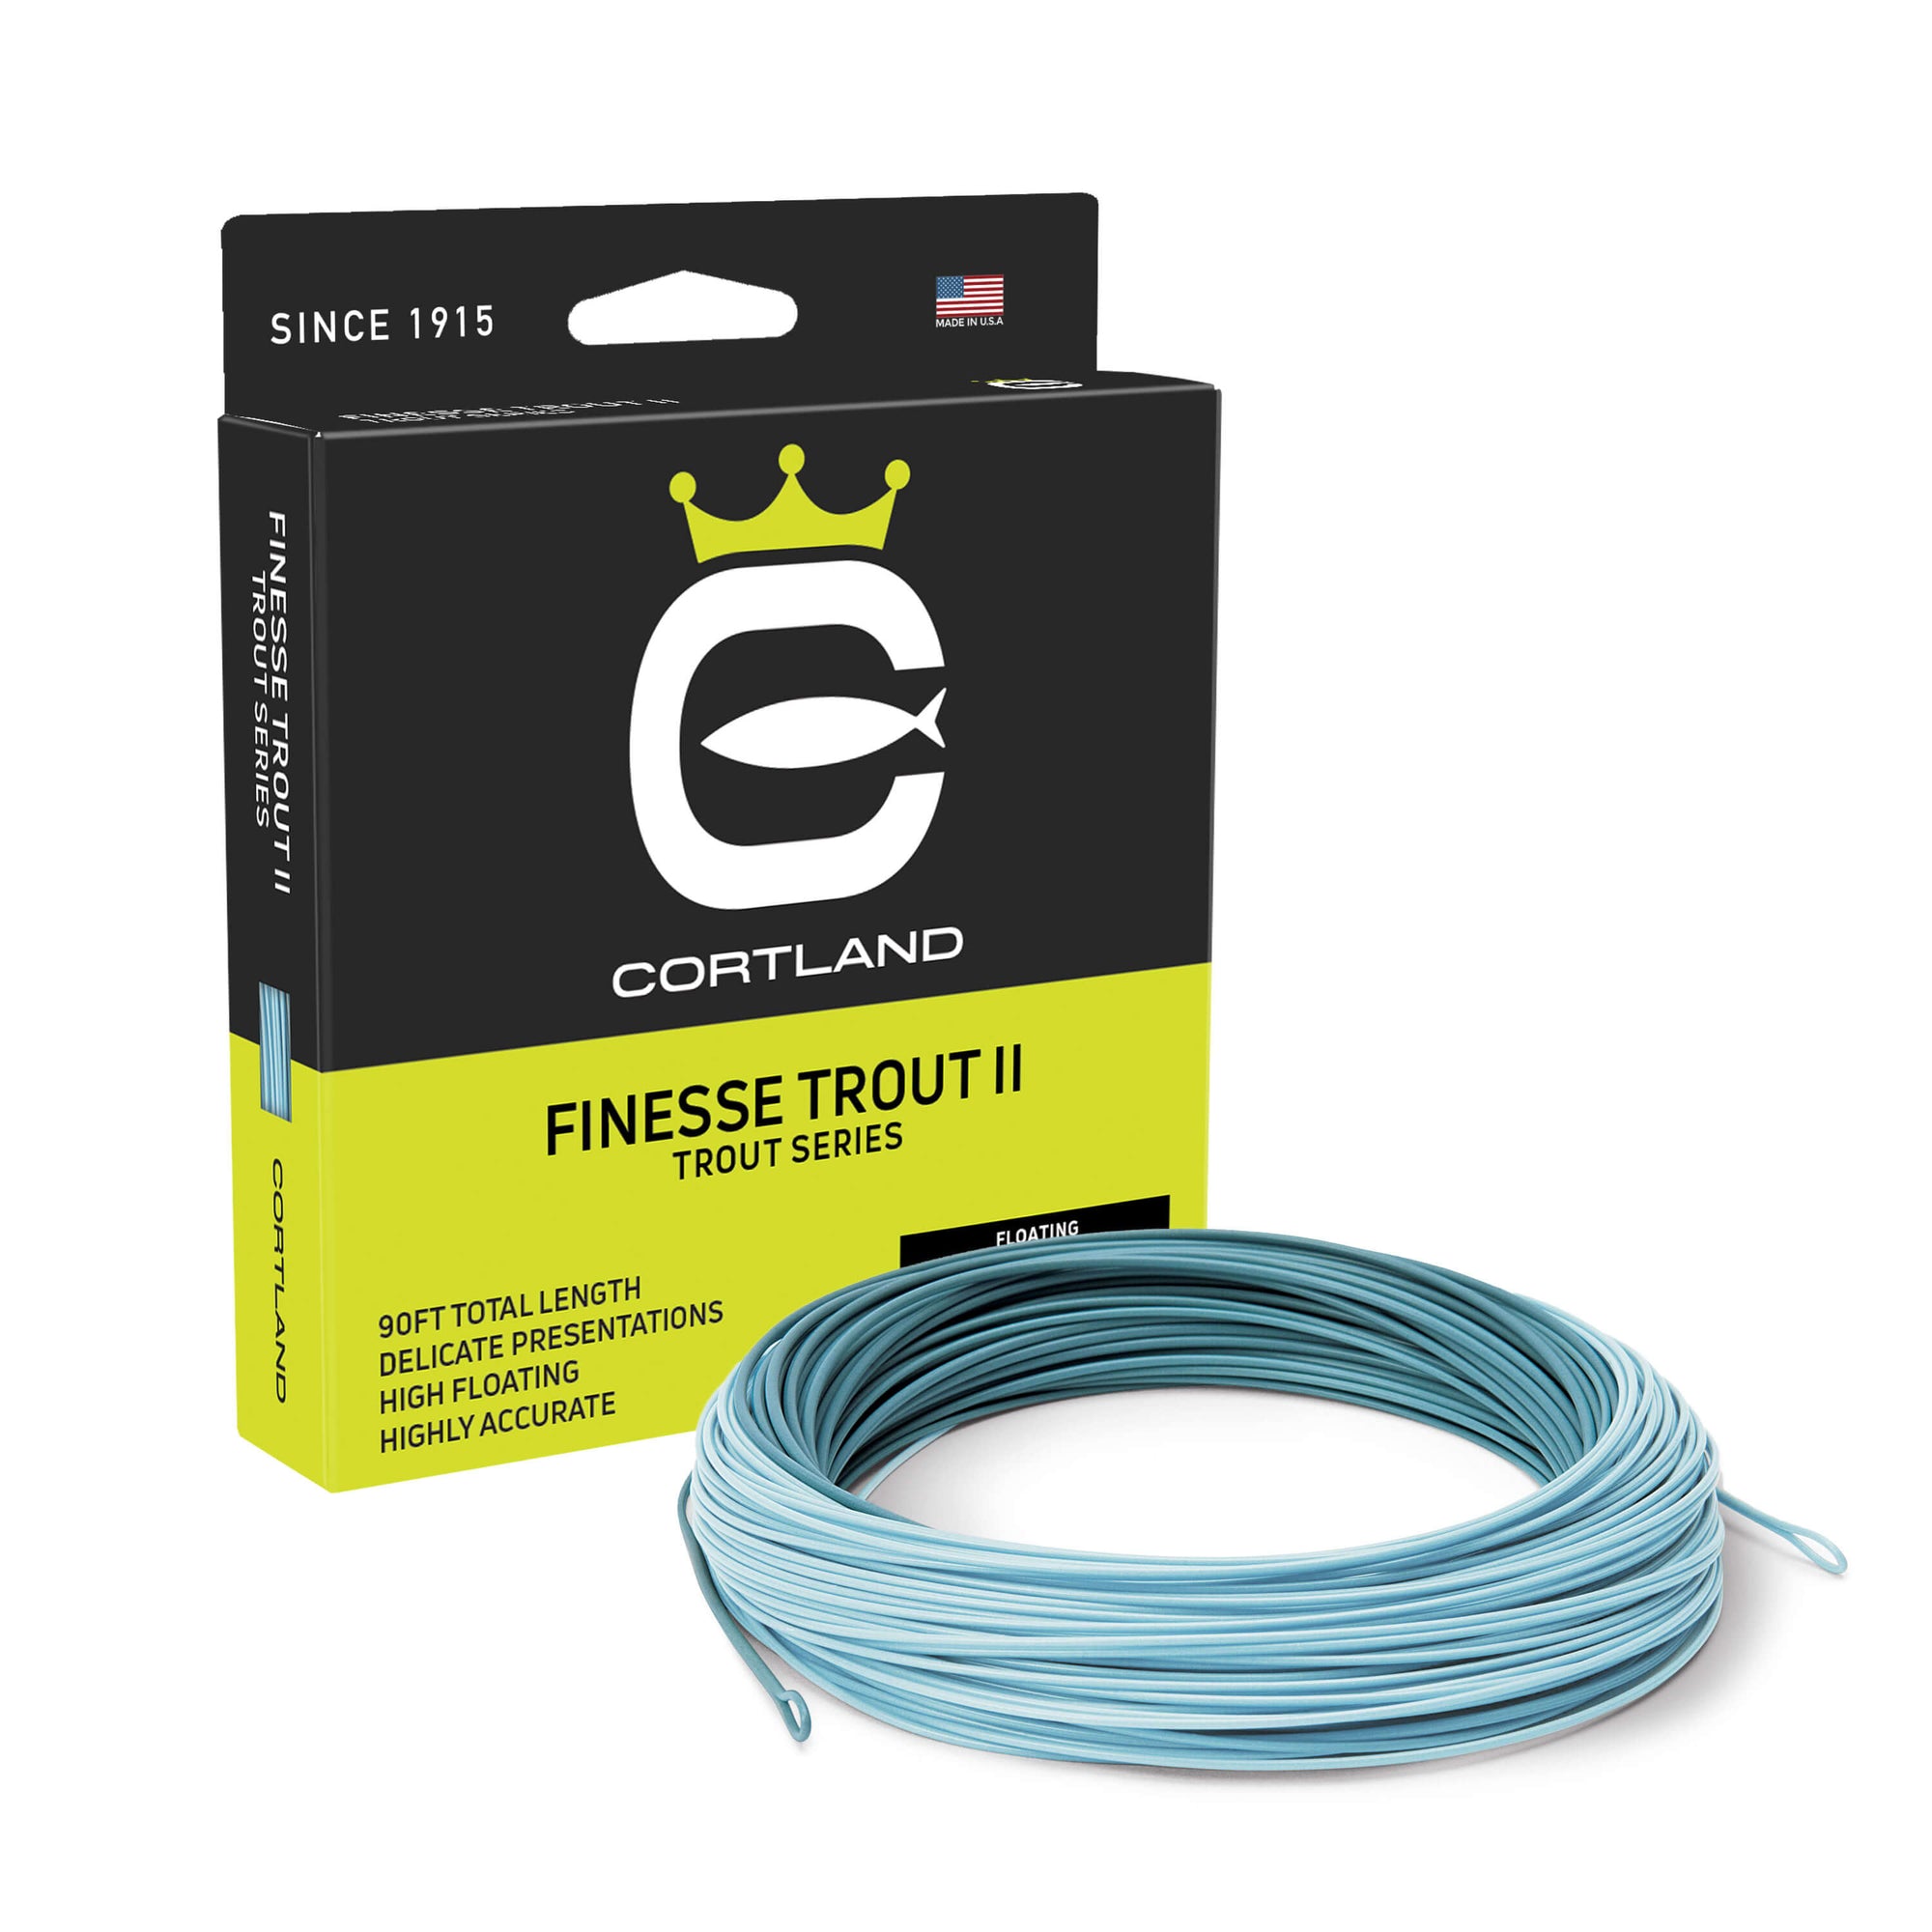 Finesse Trout II box and coil. The color of the coil is heron and light blue. The box has the Cortland logo and is black and greenish yellow.